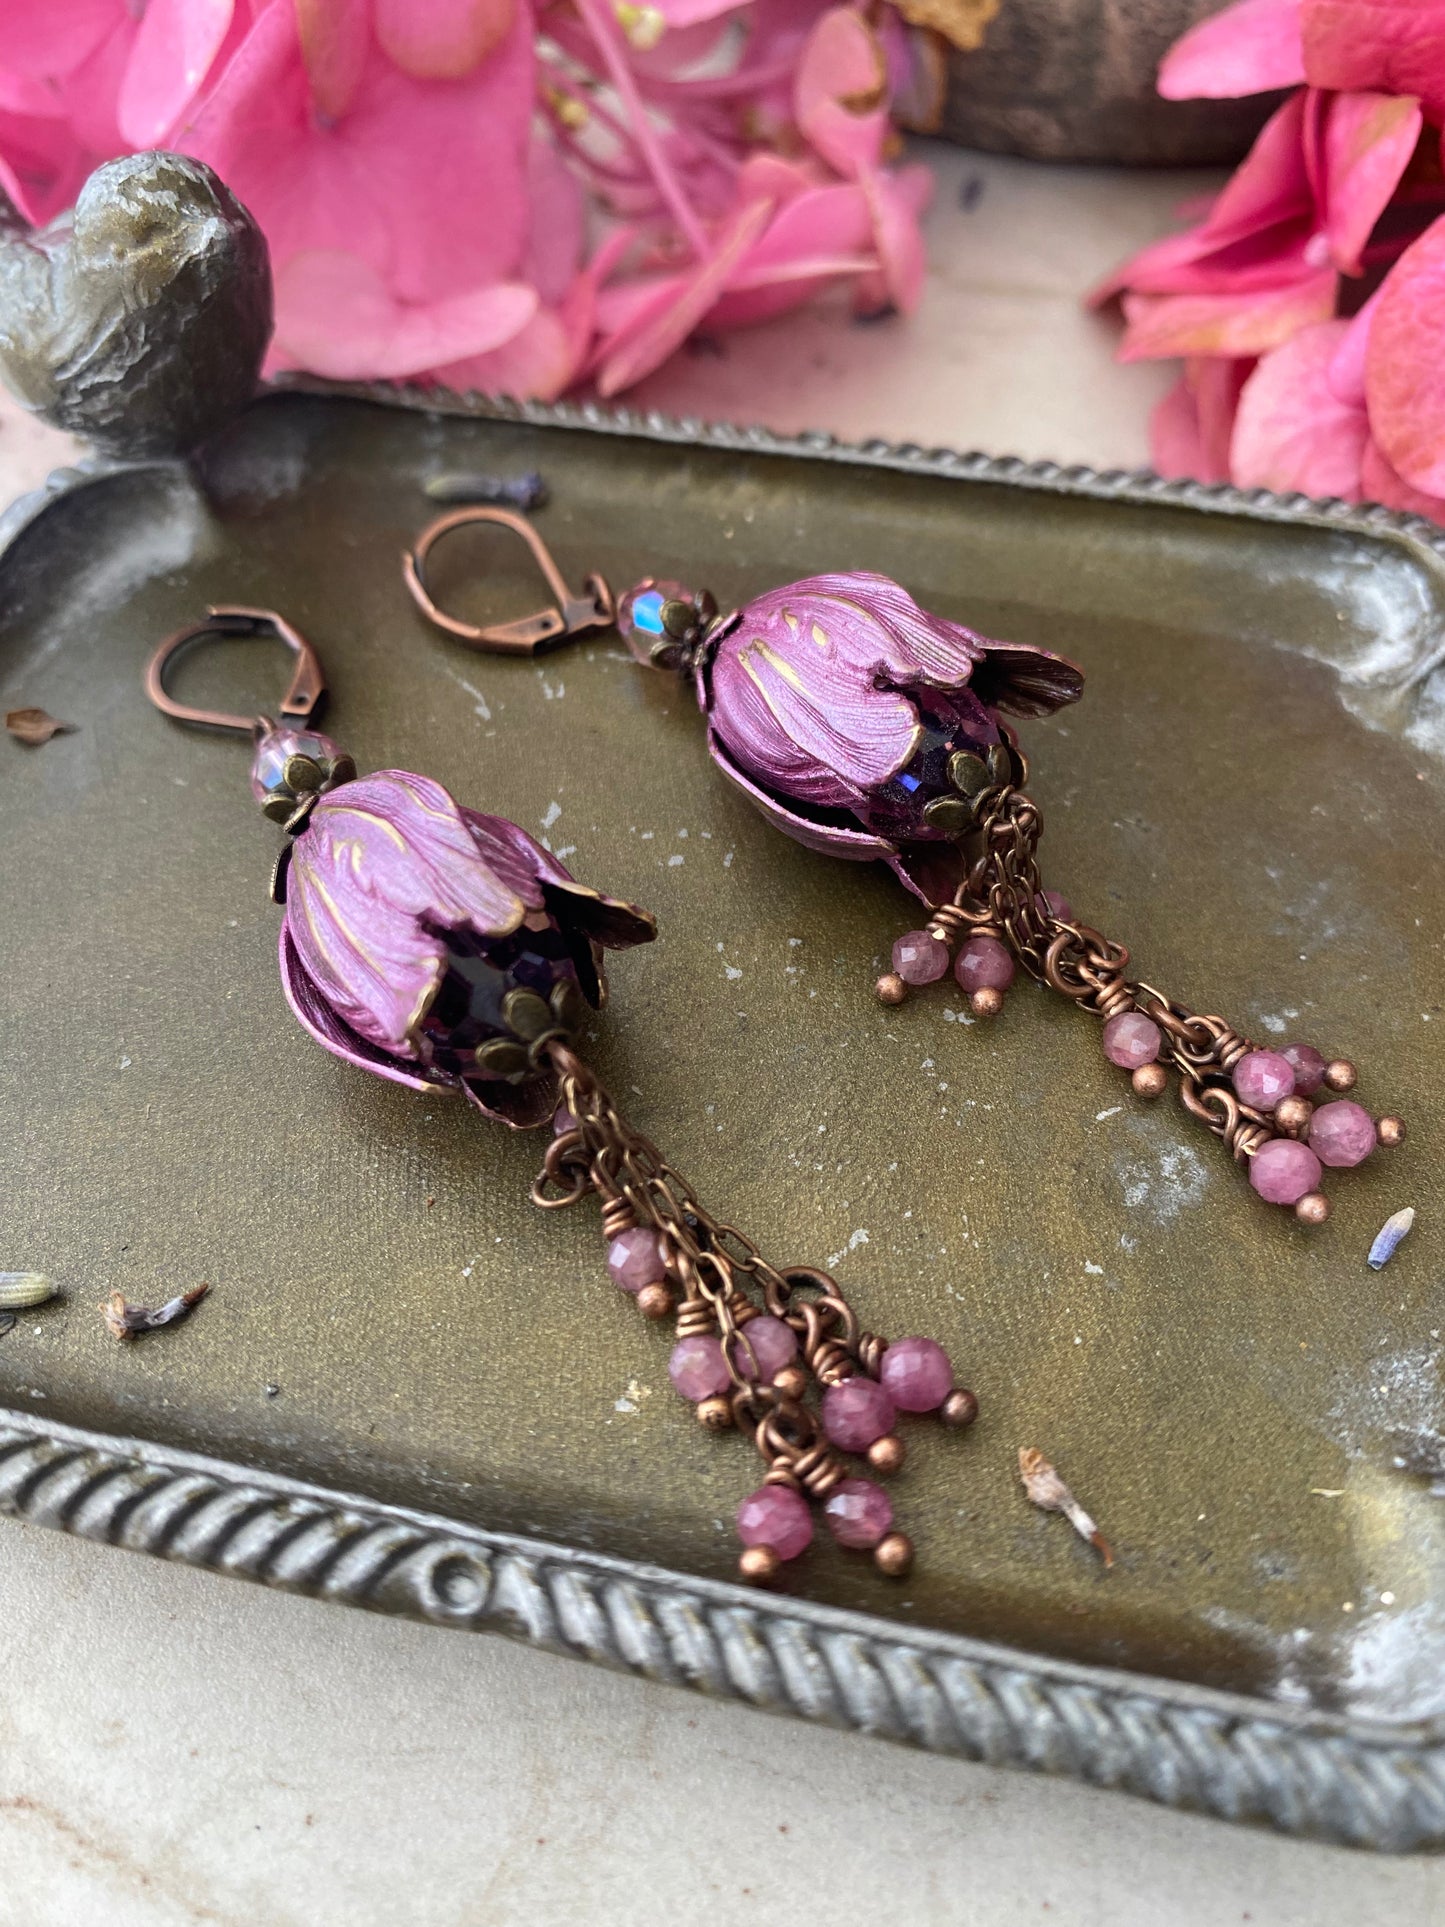 Pink crystal glass, pink tourmaline stone, flower bead caps, and copper metal earrings.